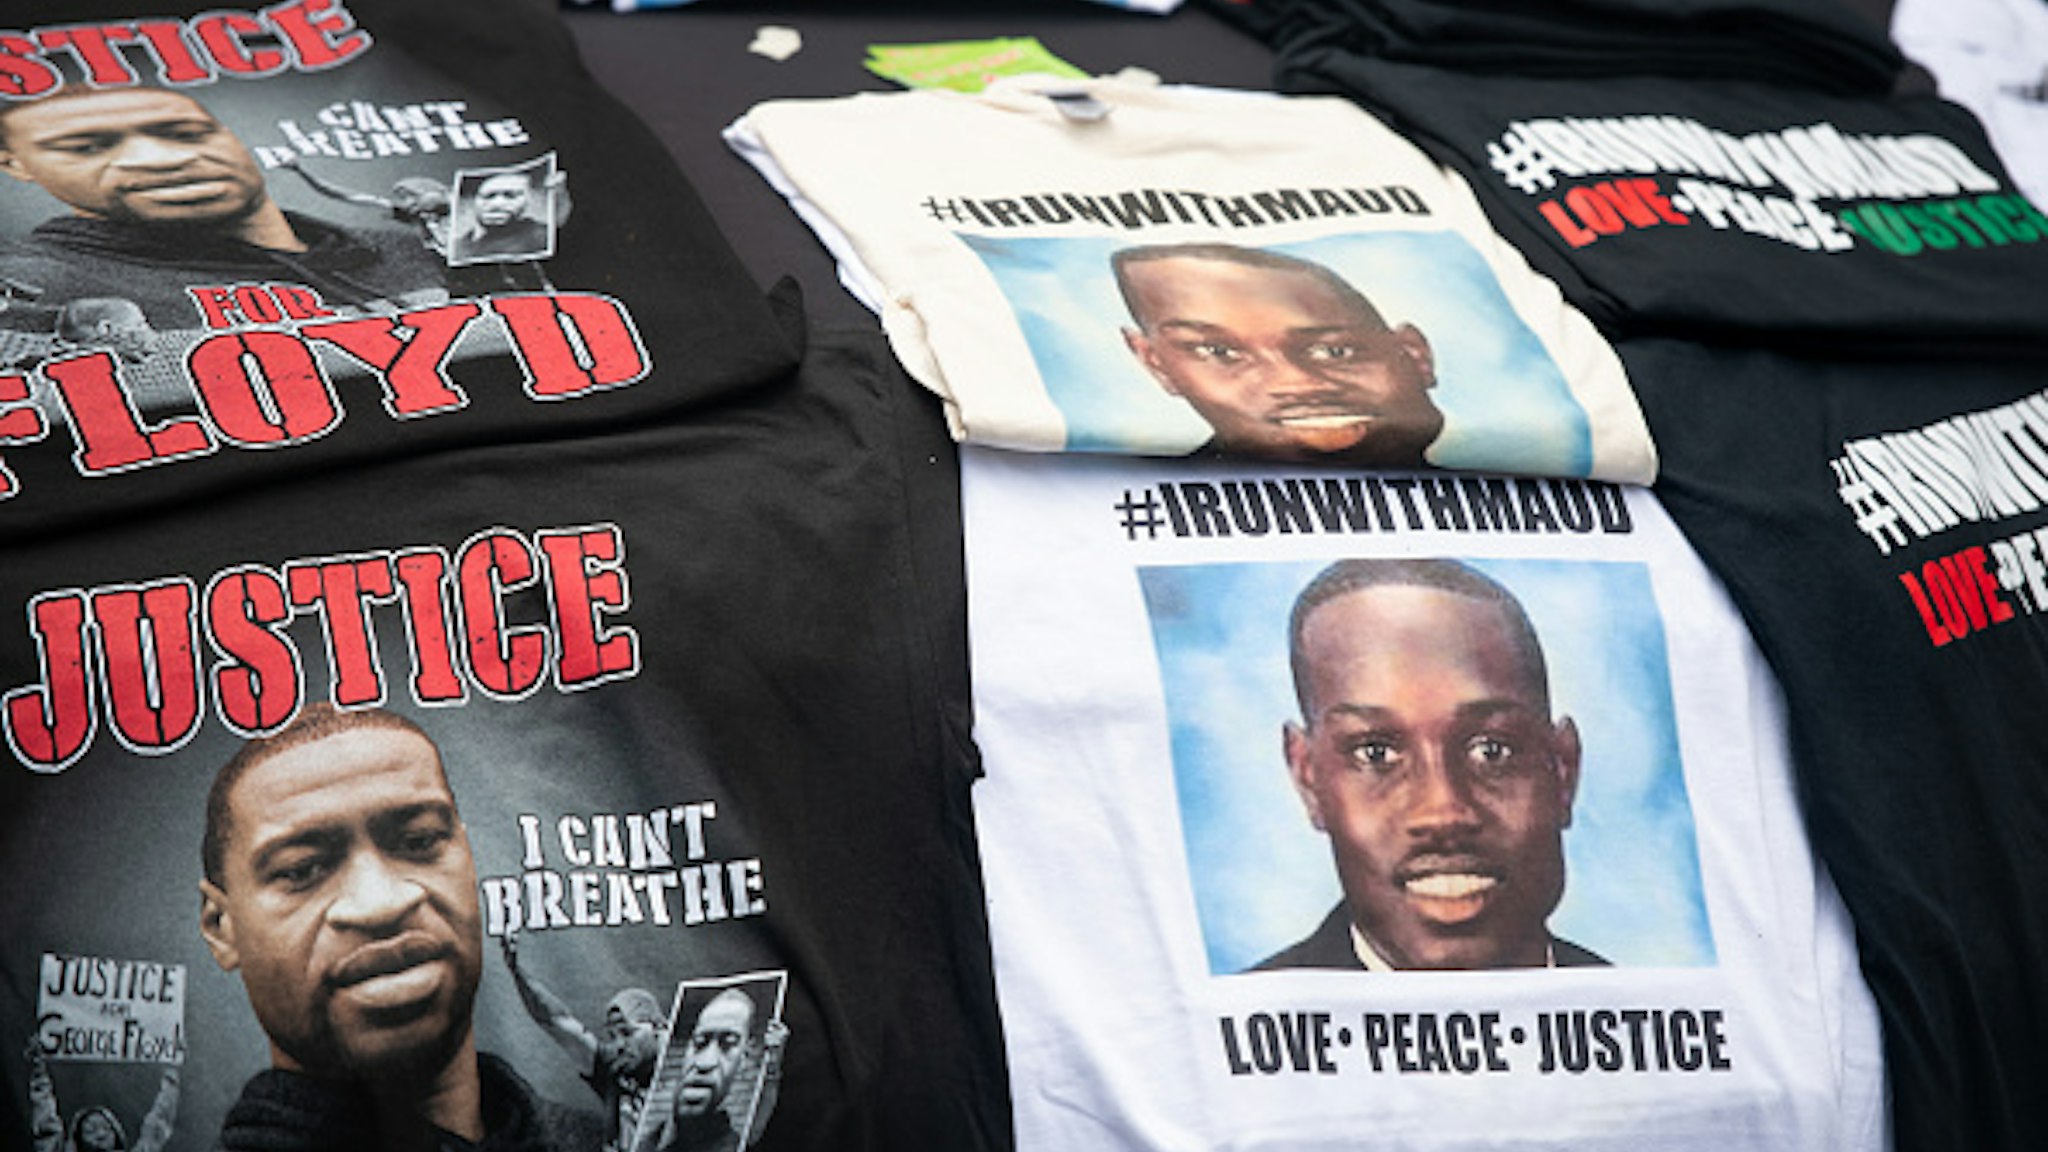 BRUNSWICK, GA - JUNE 04: T-shirts memorializing George Floyd and Ahmaud Arbery are displayed for sale on a car hood outside the Glynn County courthouse during a court appearance by Gregory and Travis McMichael, two suspects in the fatal shooting of Ahmaud Arbery, on June 4, 2020 in Brunswick, Georgia. Arbery was killed on February 23.